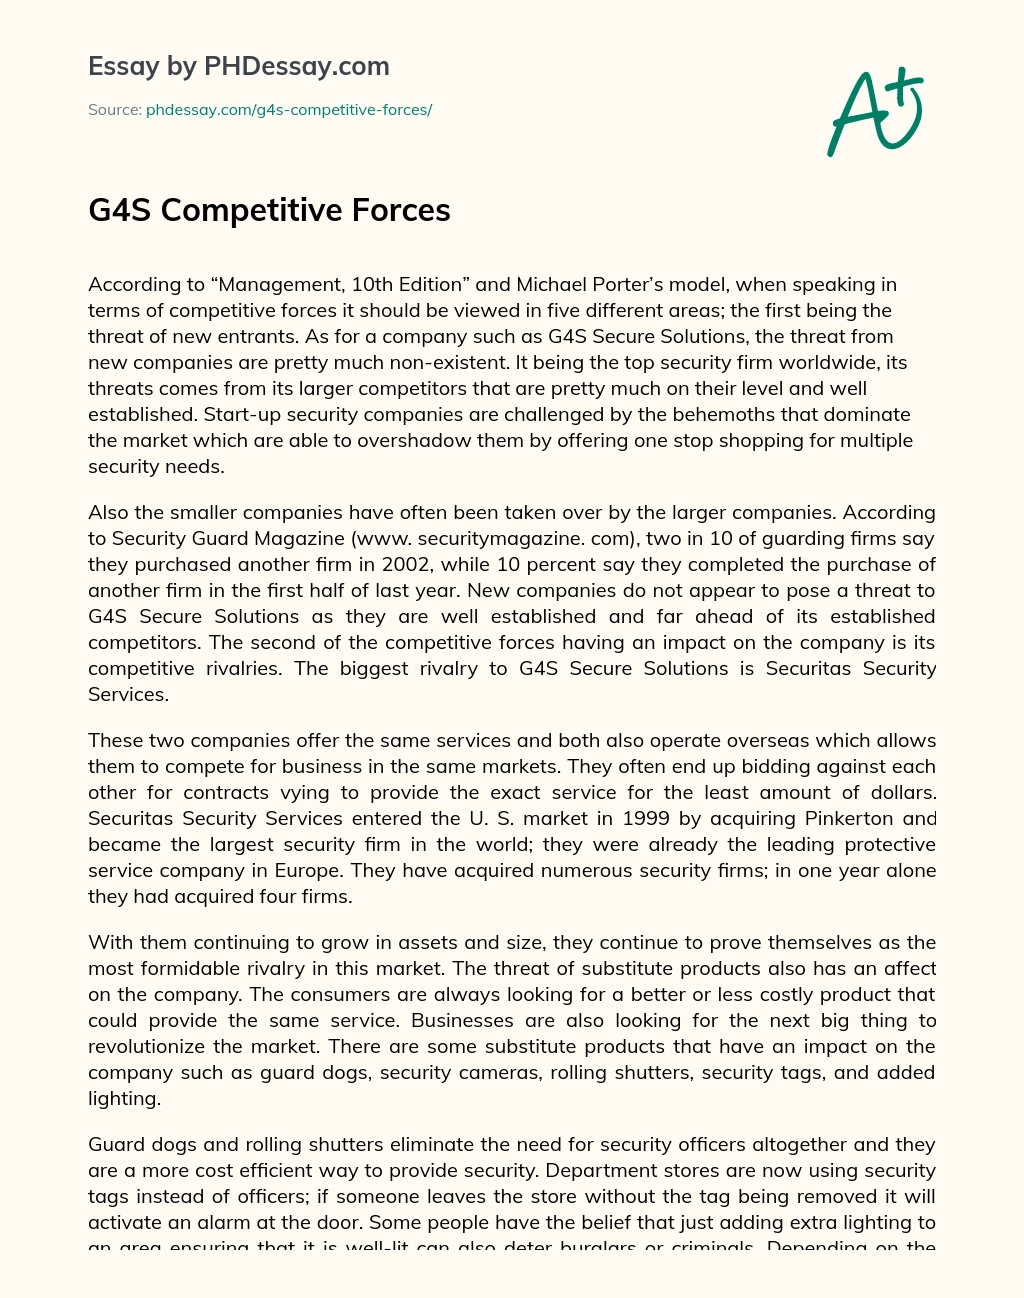 G4S Competitive Forces essay